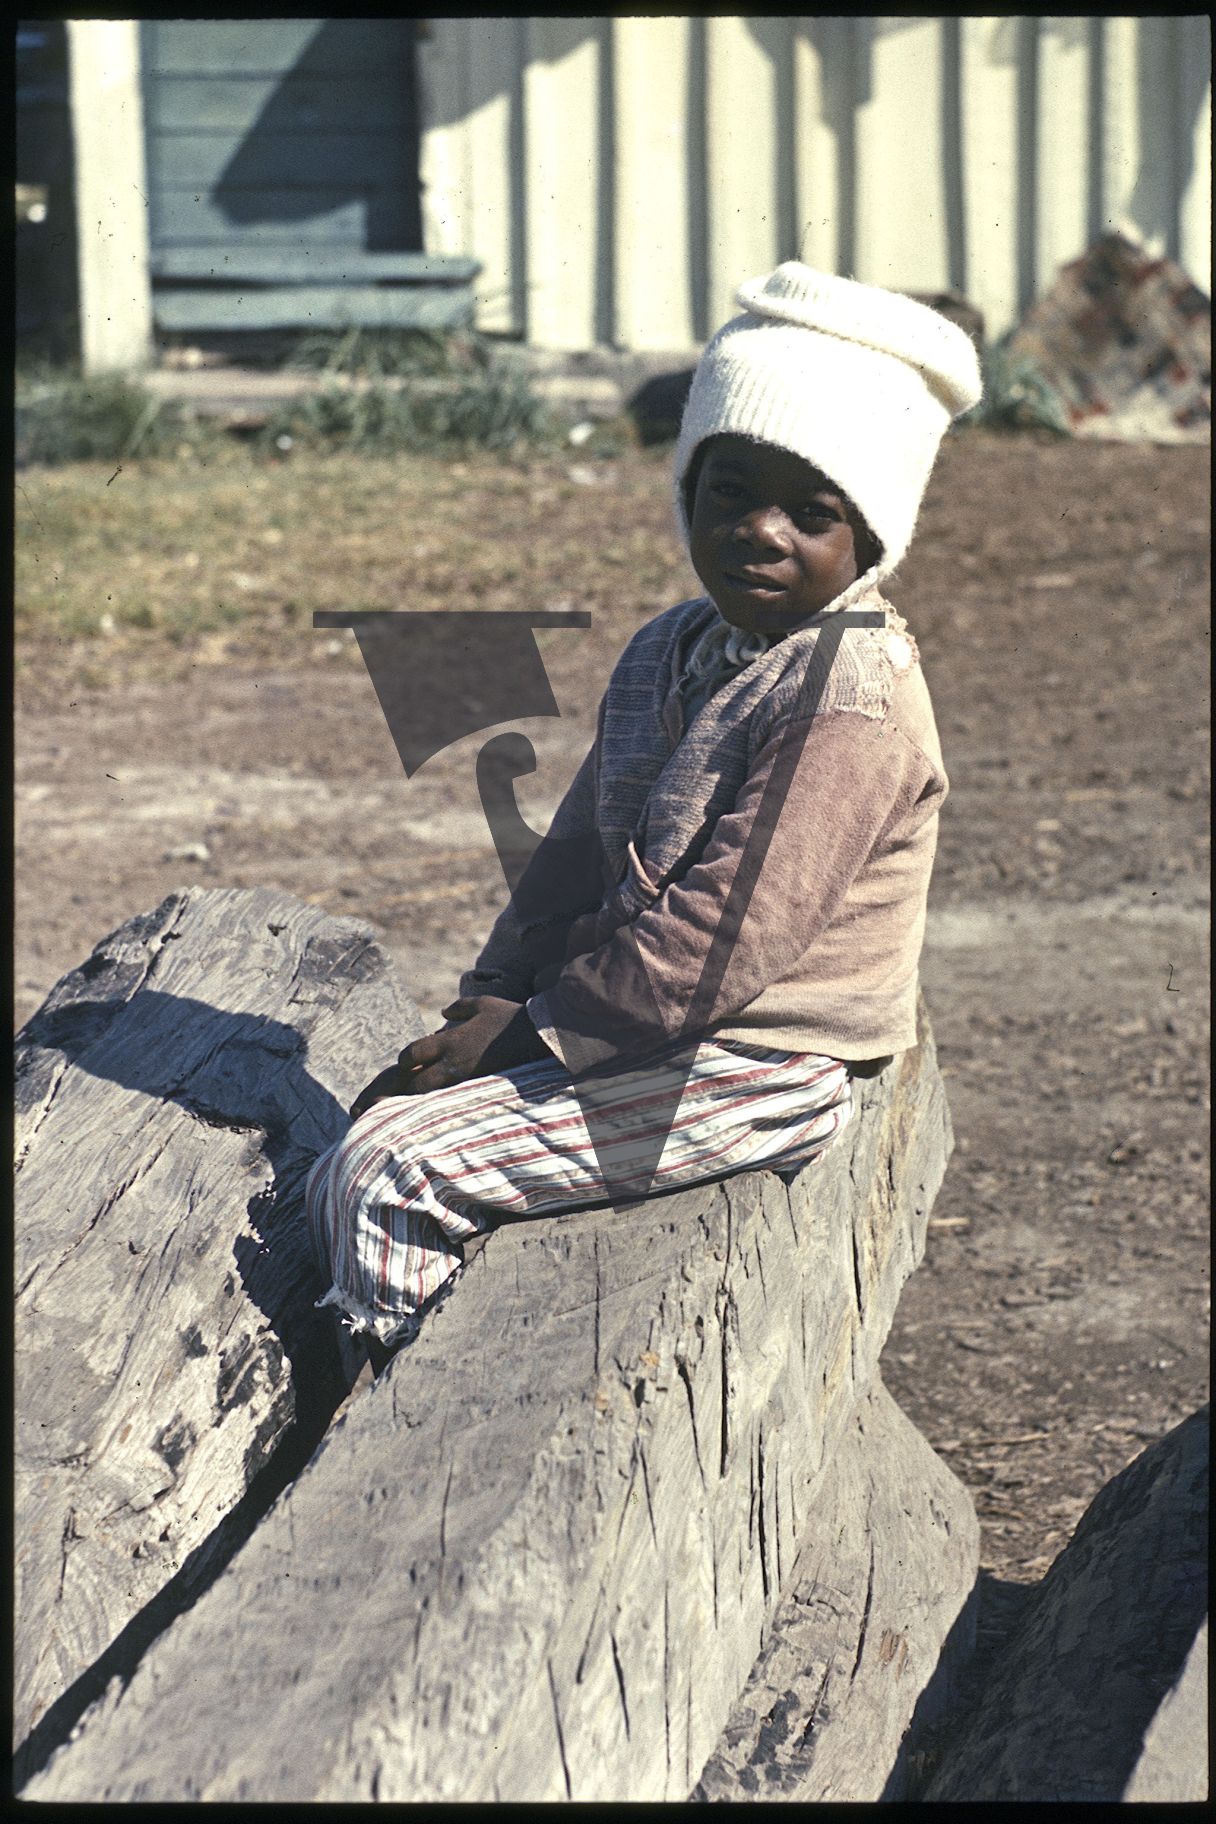 Belize, Boy with hat on, sits on log.